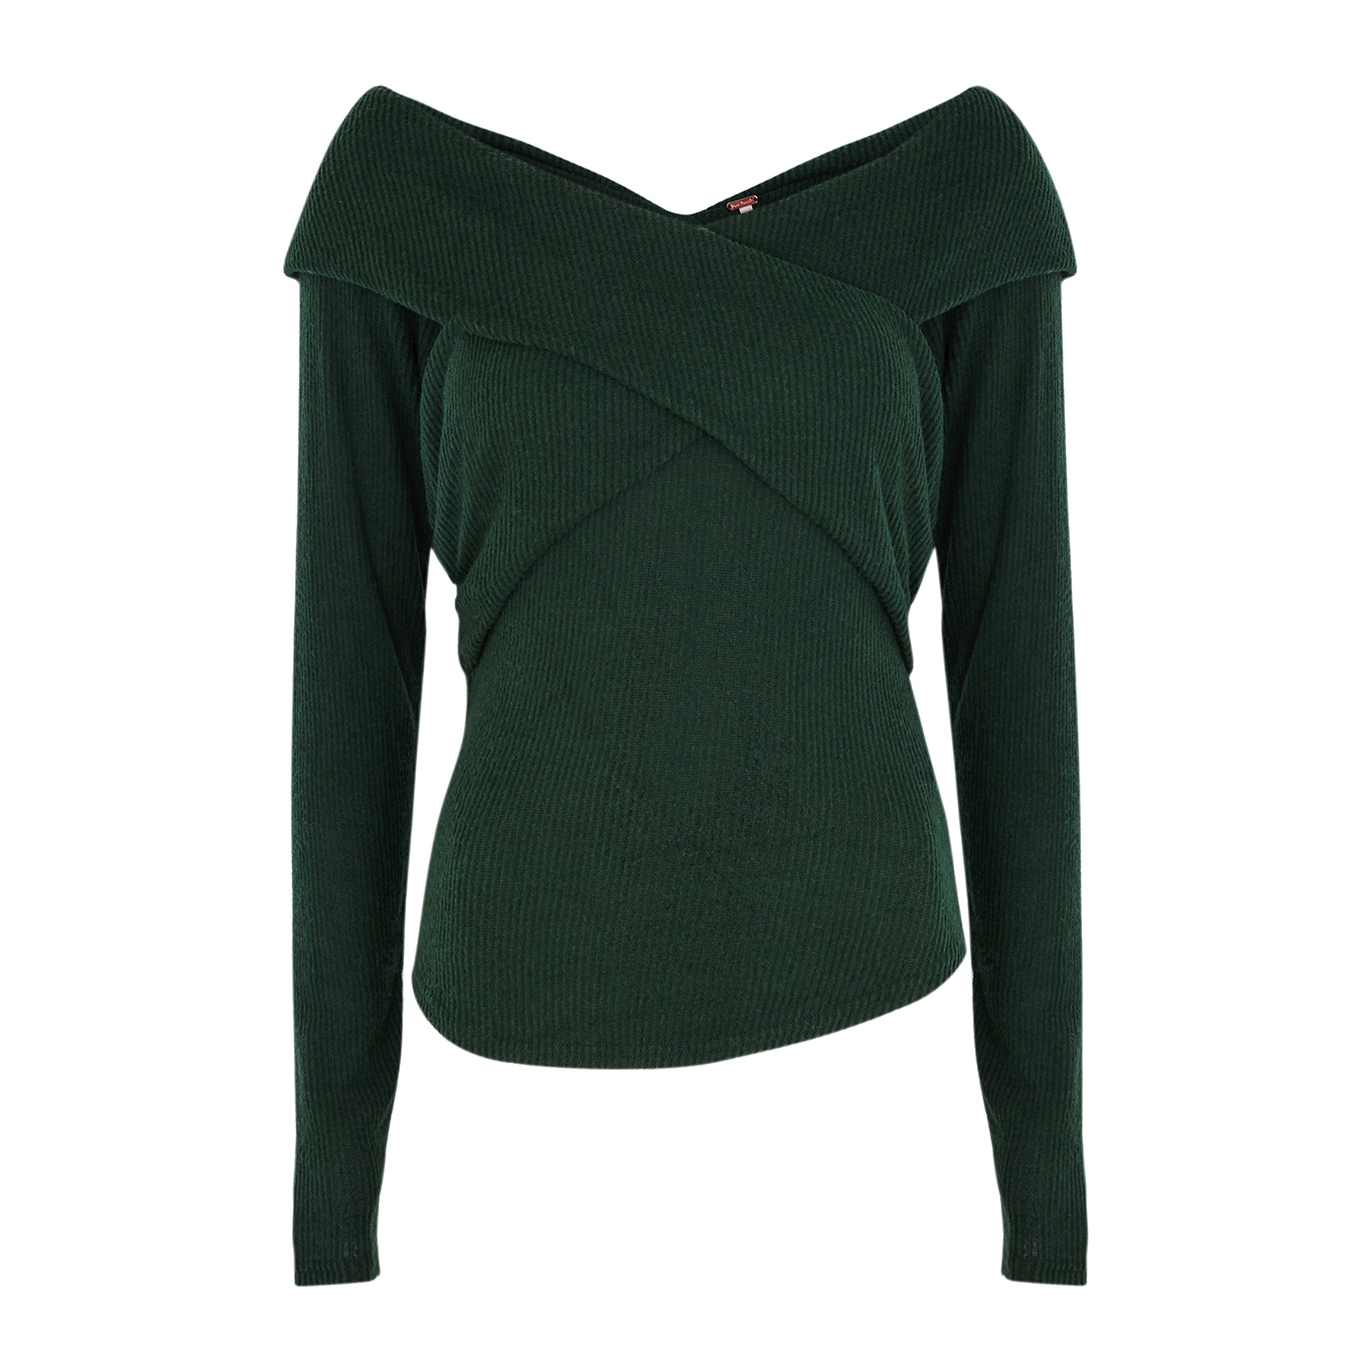 Free People Marley Green Stretch-Knit Top